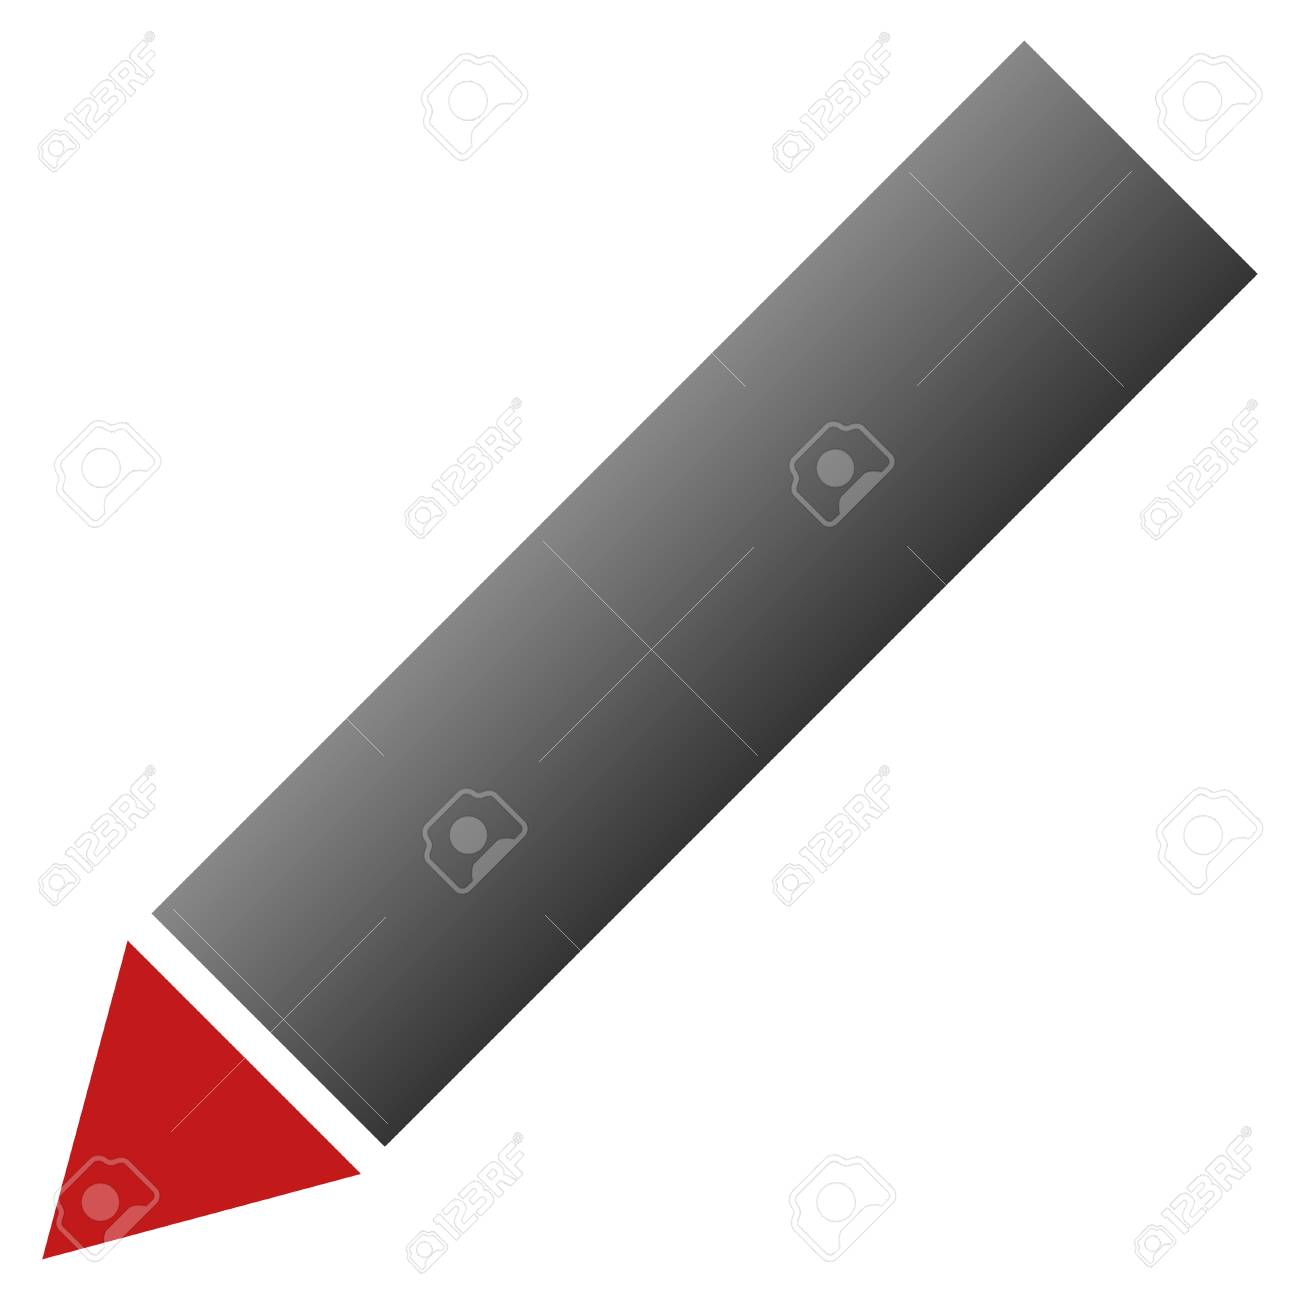 Blank Paper And A Pencil Vector Icon. Black And White Illustration 